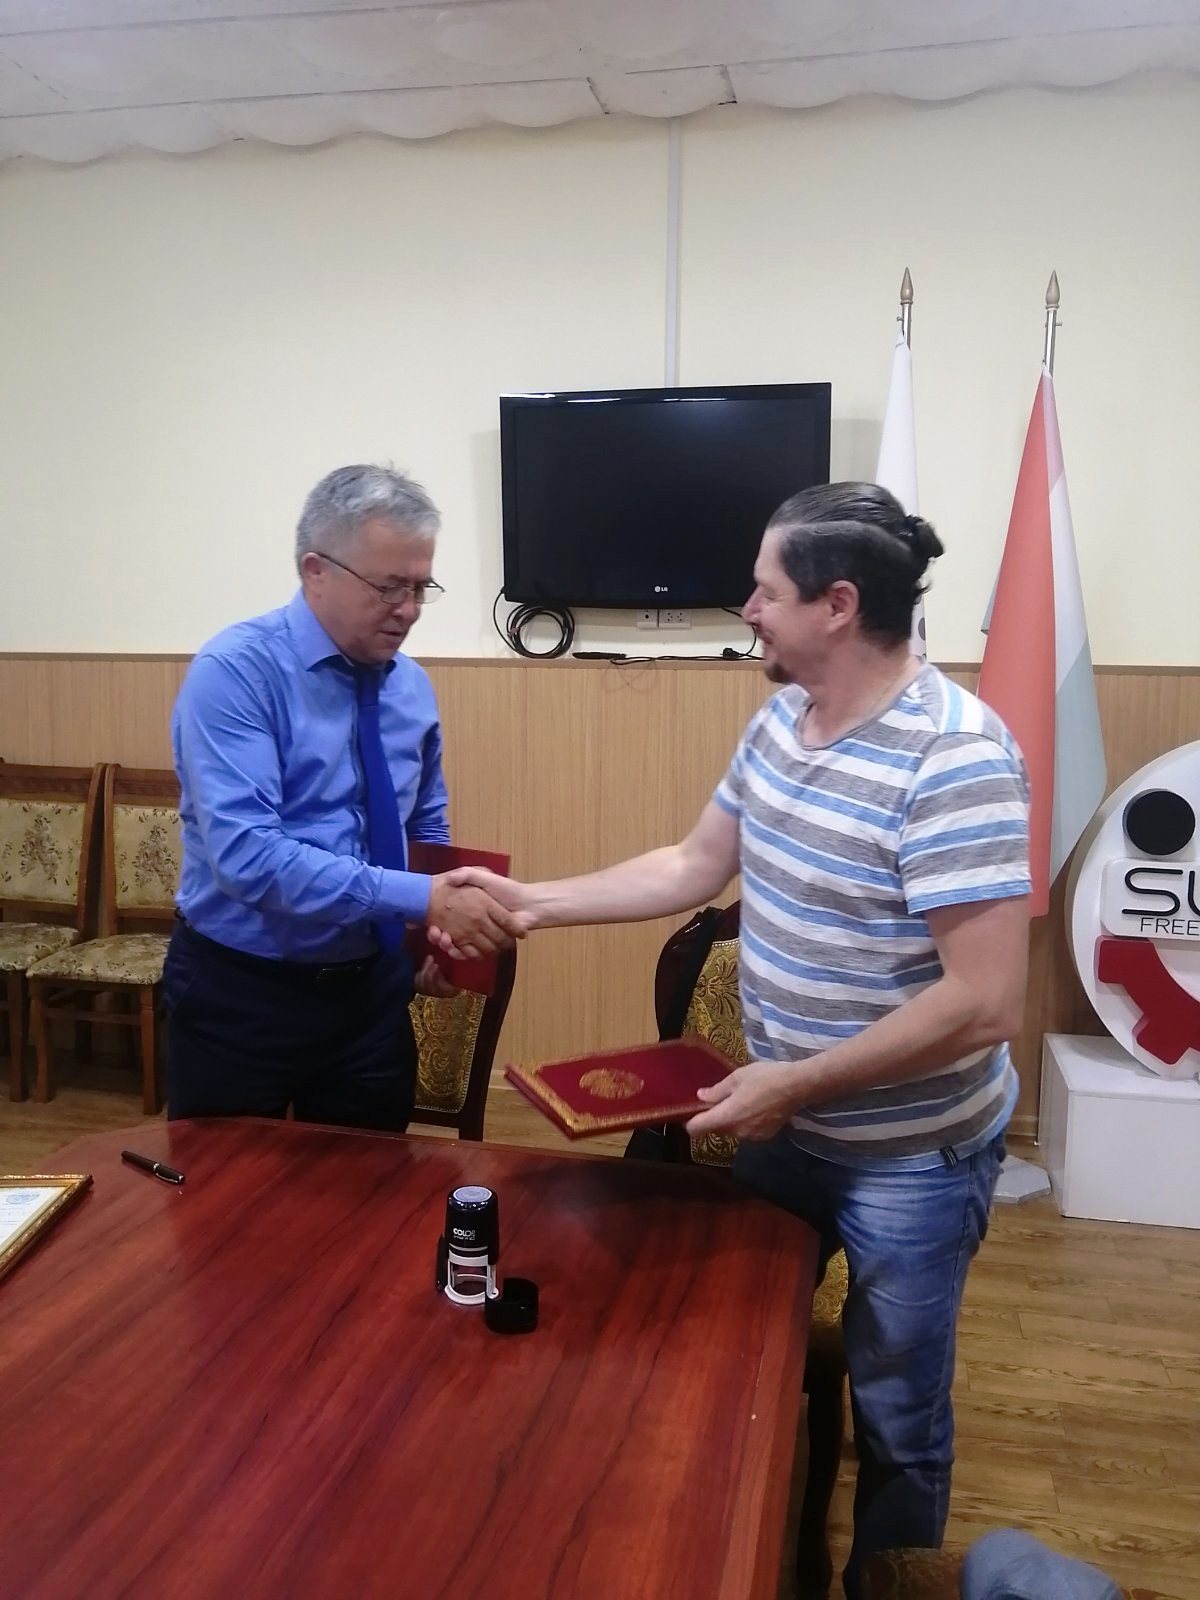 KHUJAND PLAST LLC RECEIVED THE STATUS OF THE SUBJECT OF SUGHD FEZ